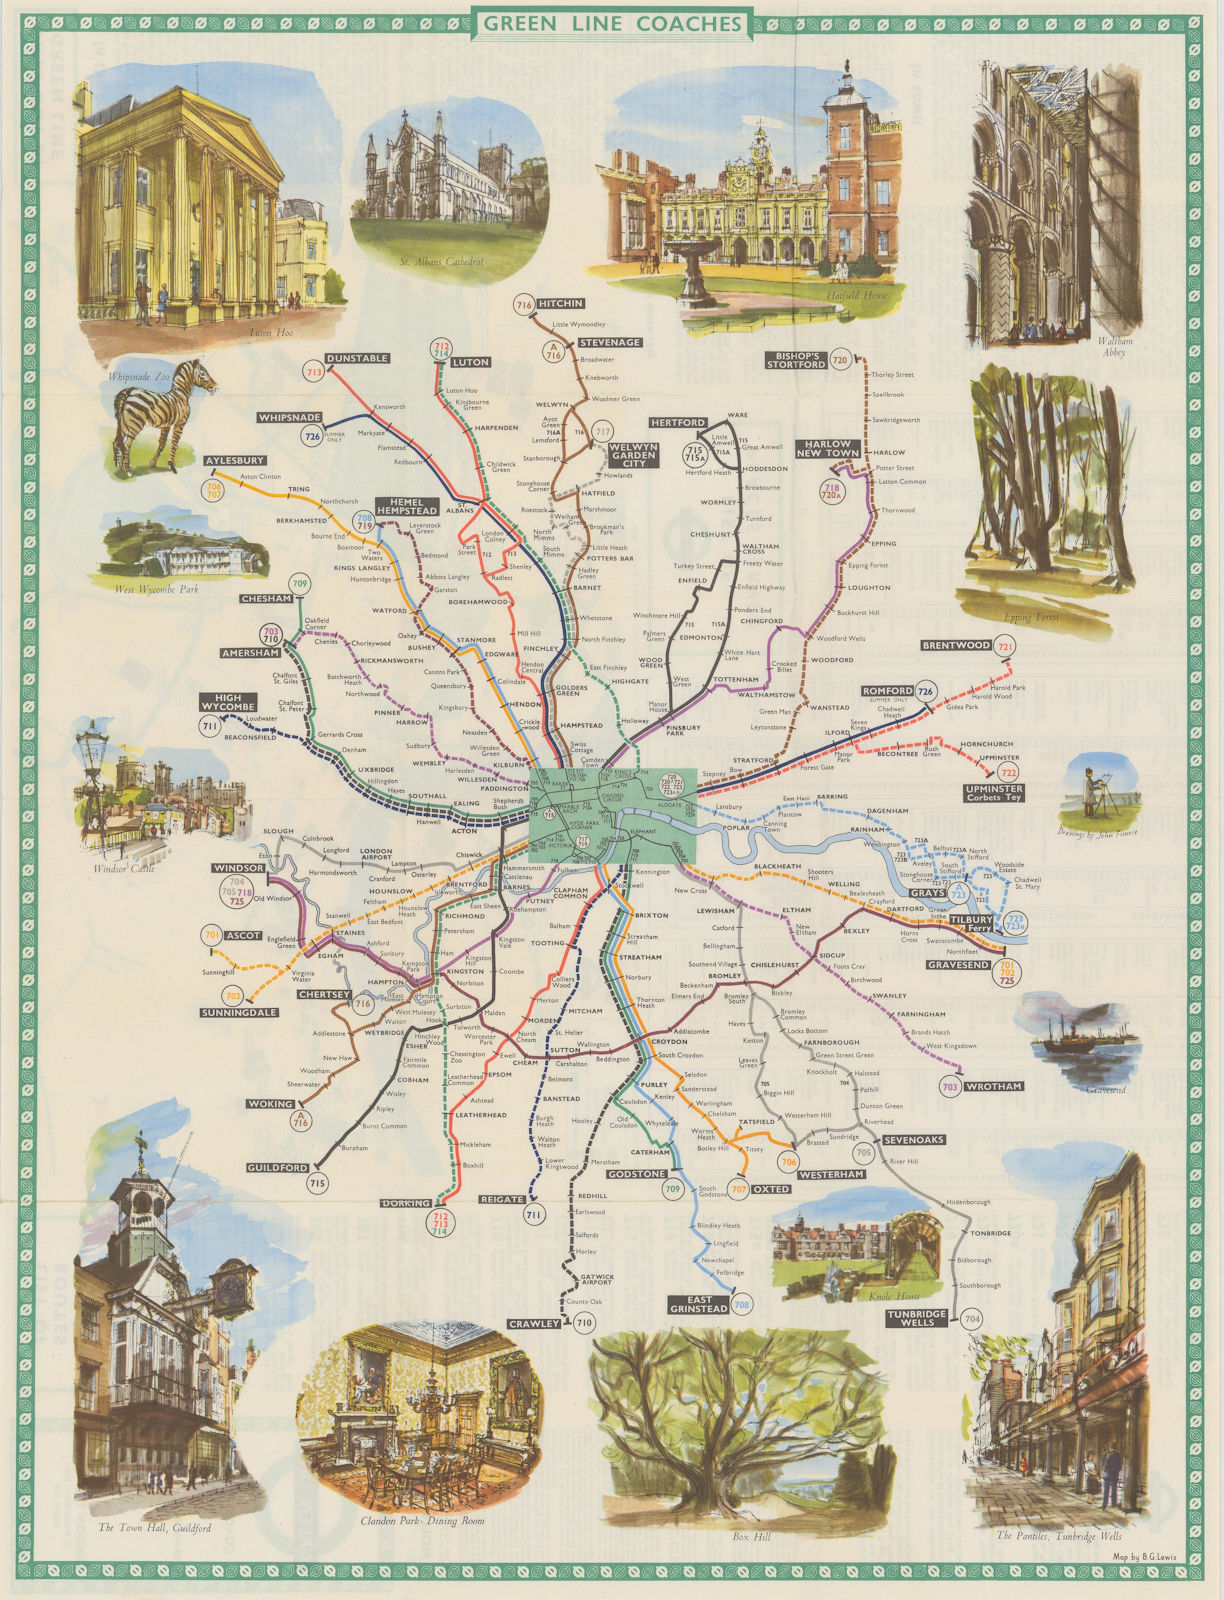 Associate Product London Transport Green Line Coach Routes. LEWIS 1962 old vintage map chart